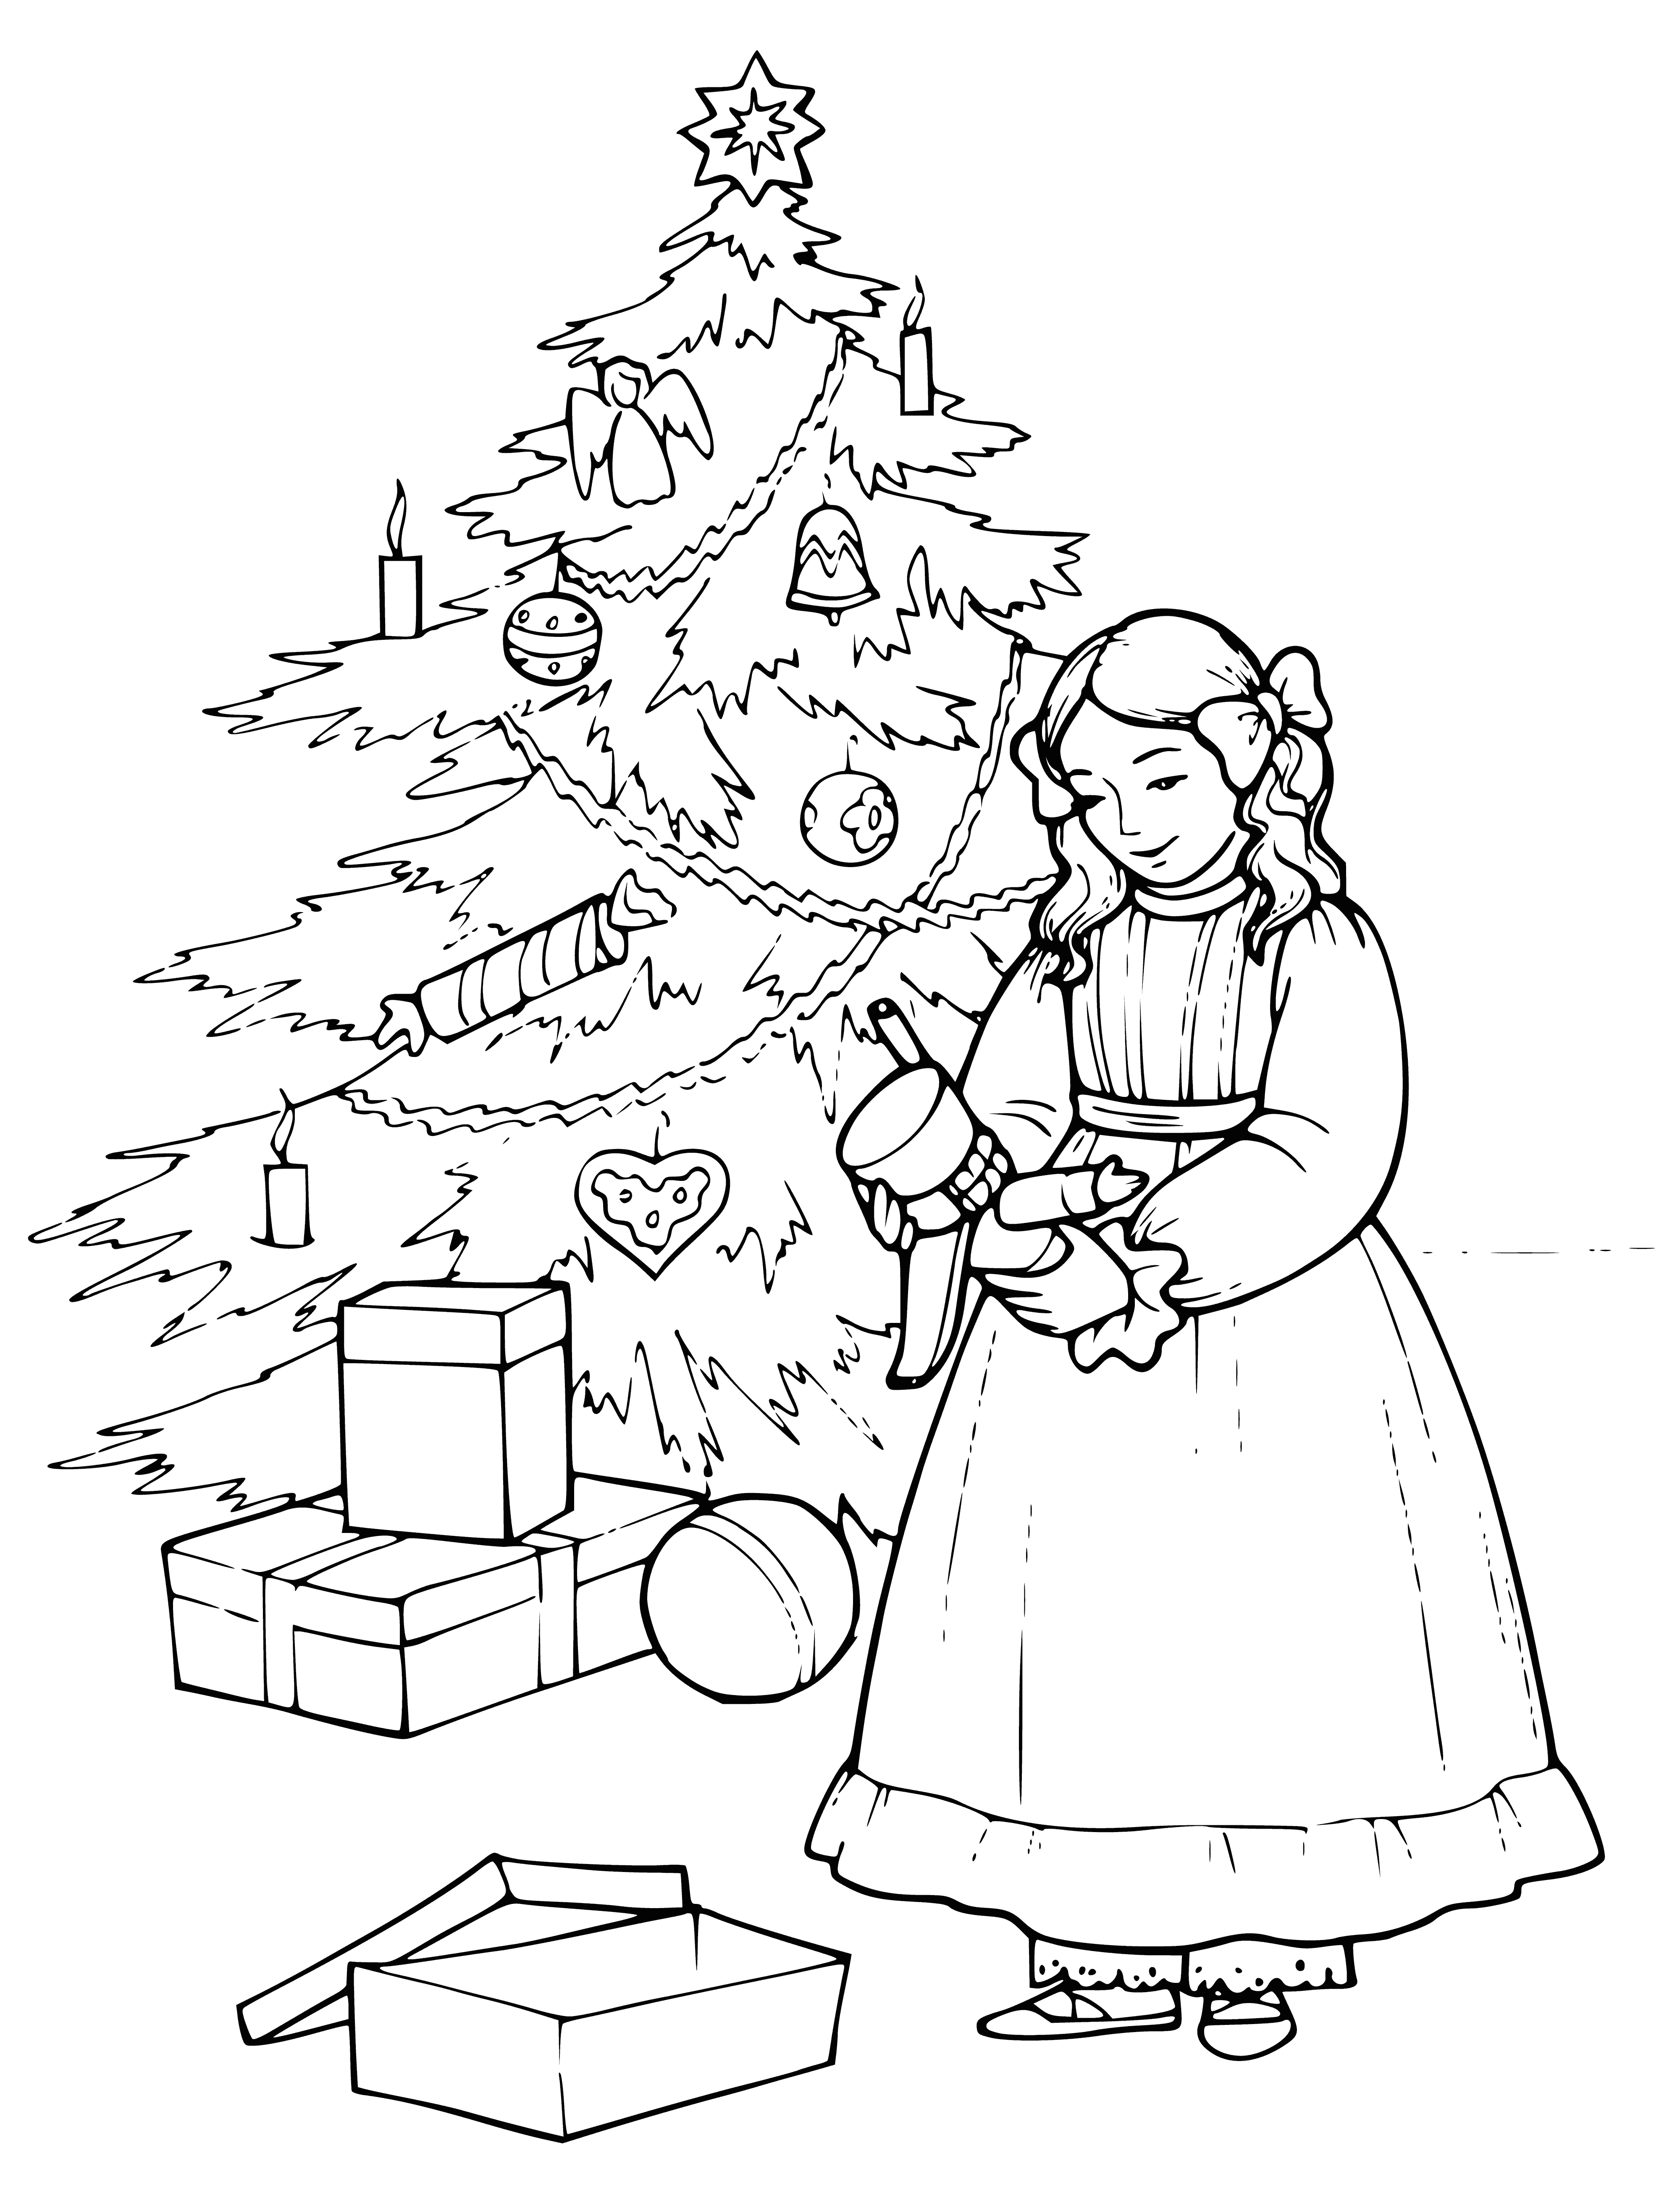 coloring page: Girl in pink dress at Xmas tree with blond curls and blue eyes, holds nutcracker in right hand.